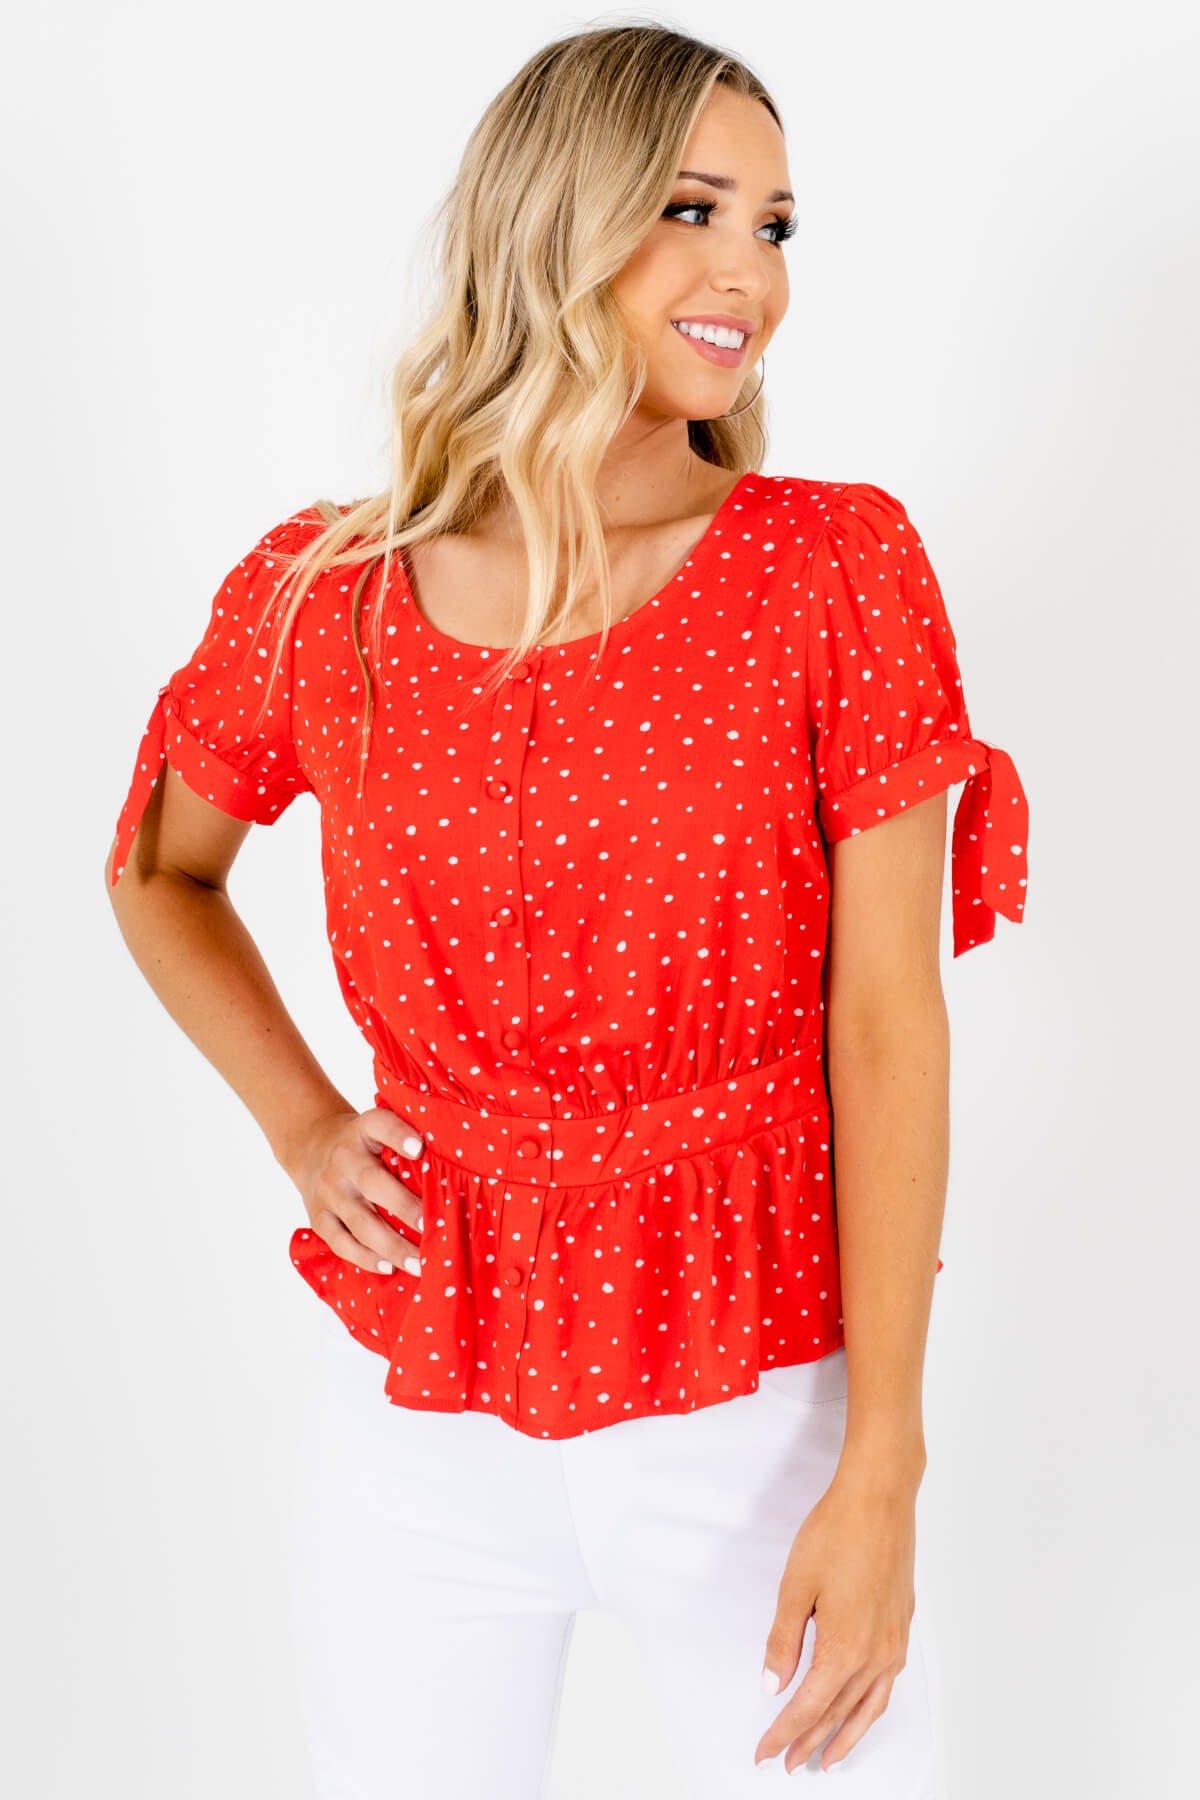 Red Polka Dot Cute and Comfortable Boutique Tops for Women